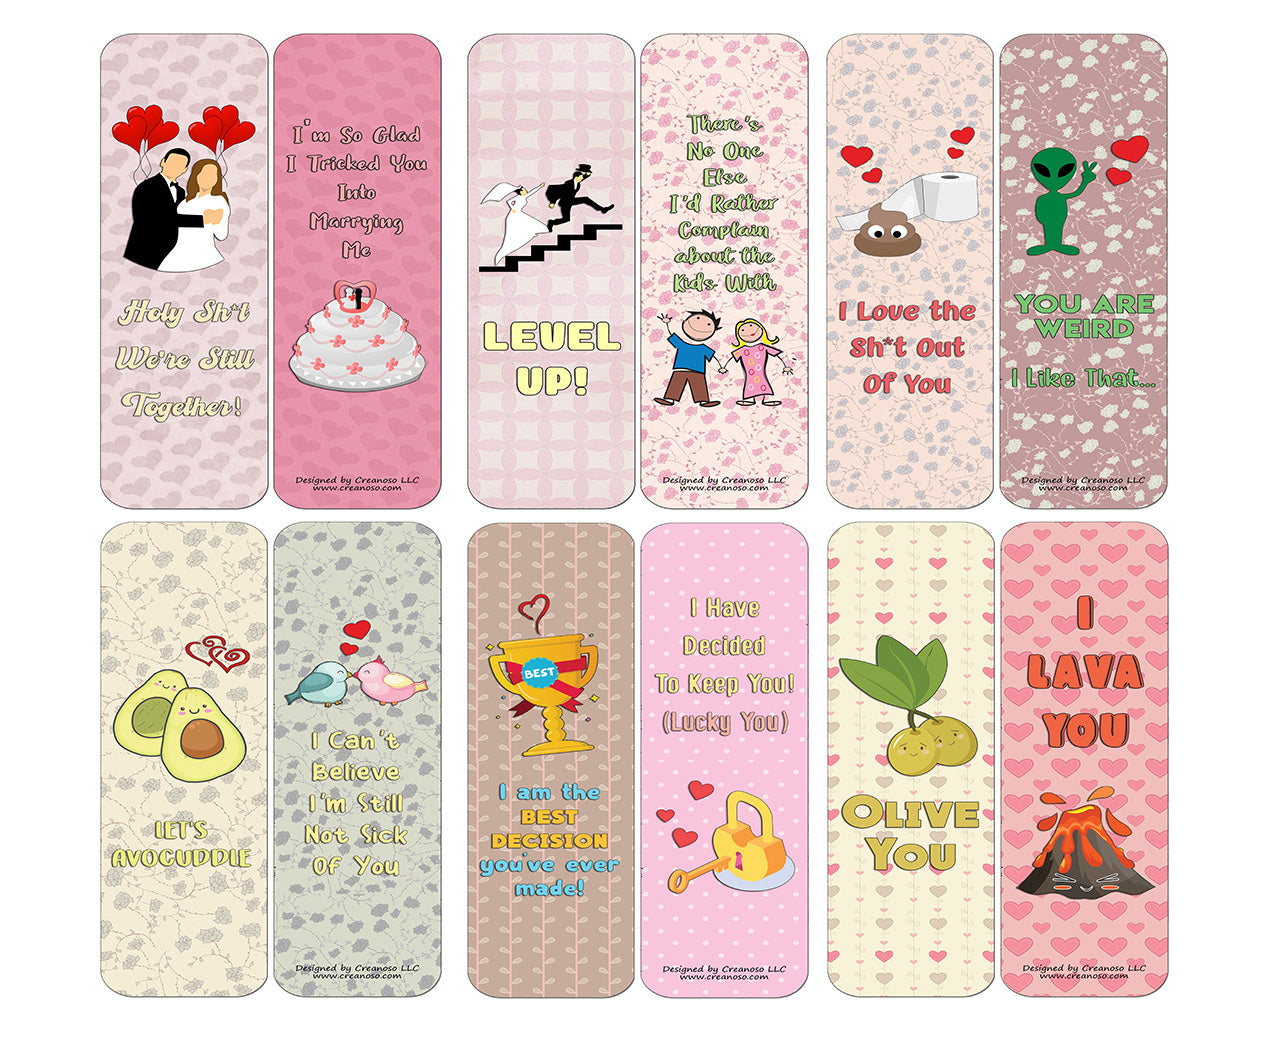 Creanoso Funny Lover Bookmarks Cards (12-Pack) - Stocking Stuffers Premium Quality Gift Ideas for Children, Teens, & Adults - Corporate Giveaways & Party Favors